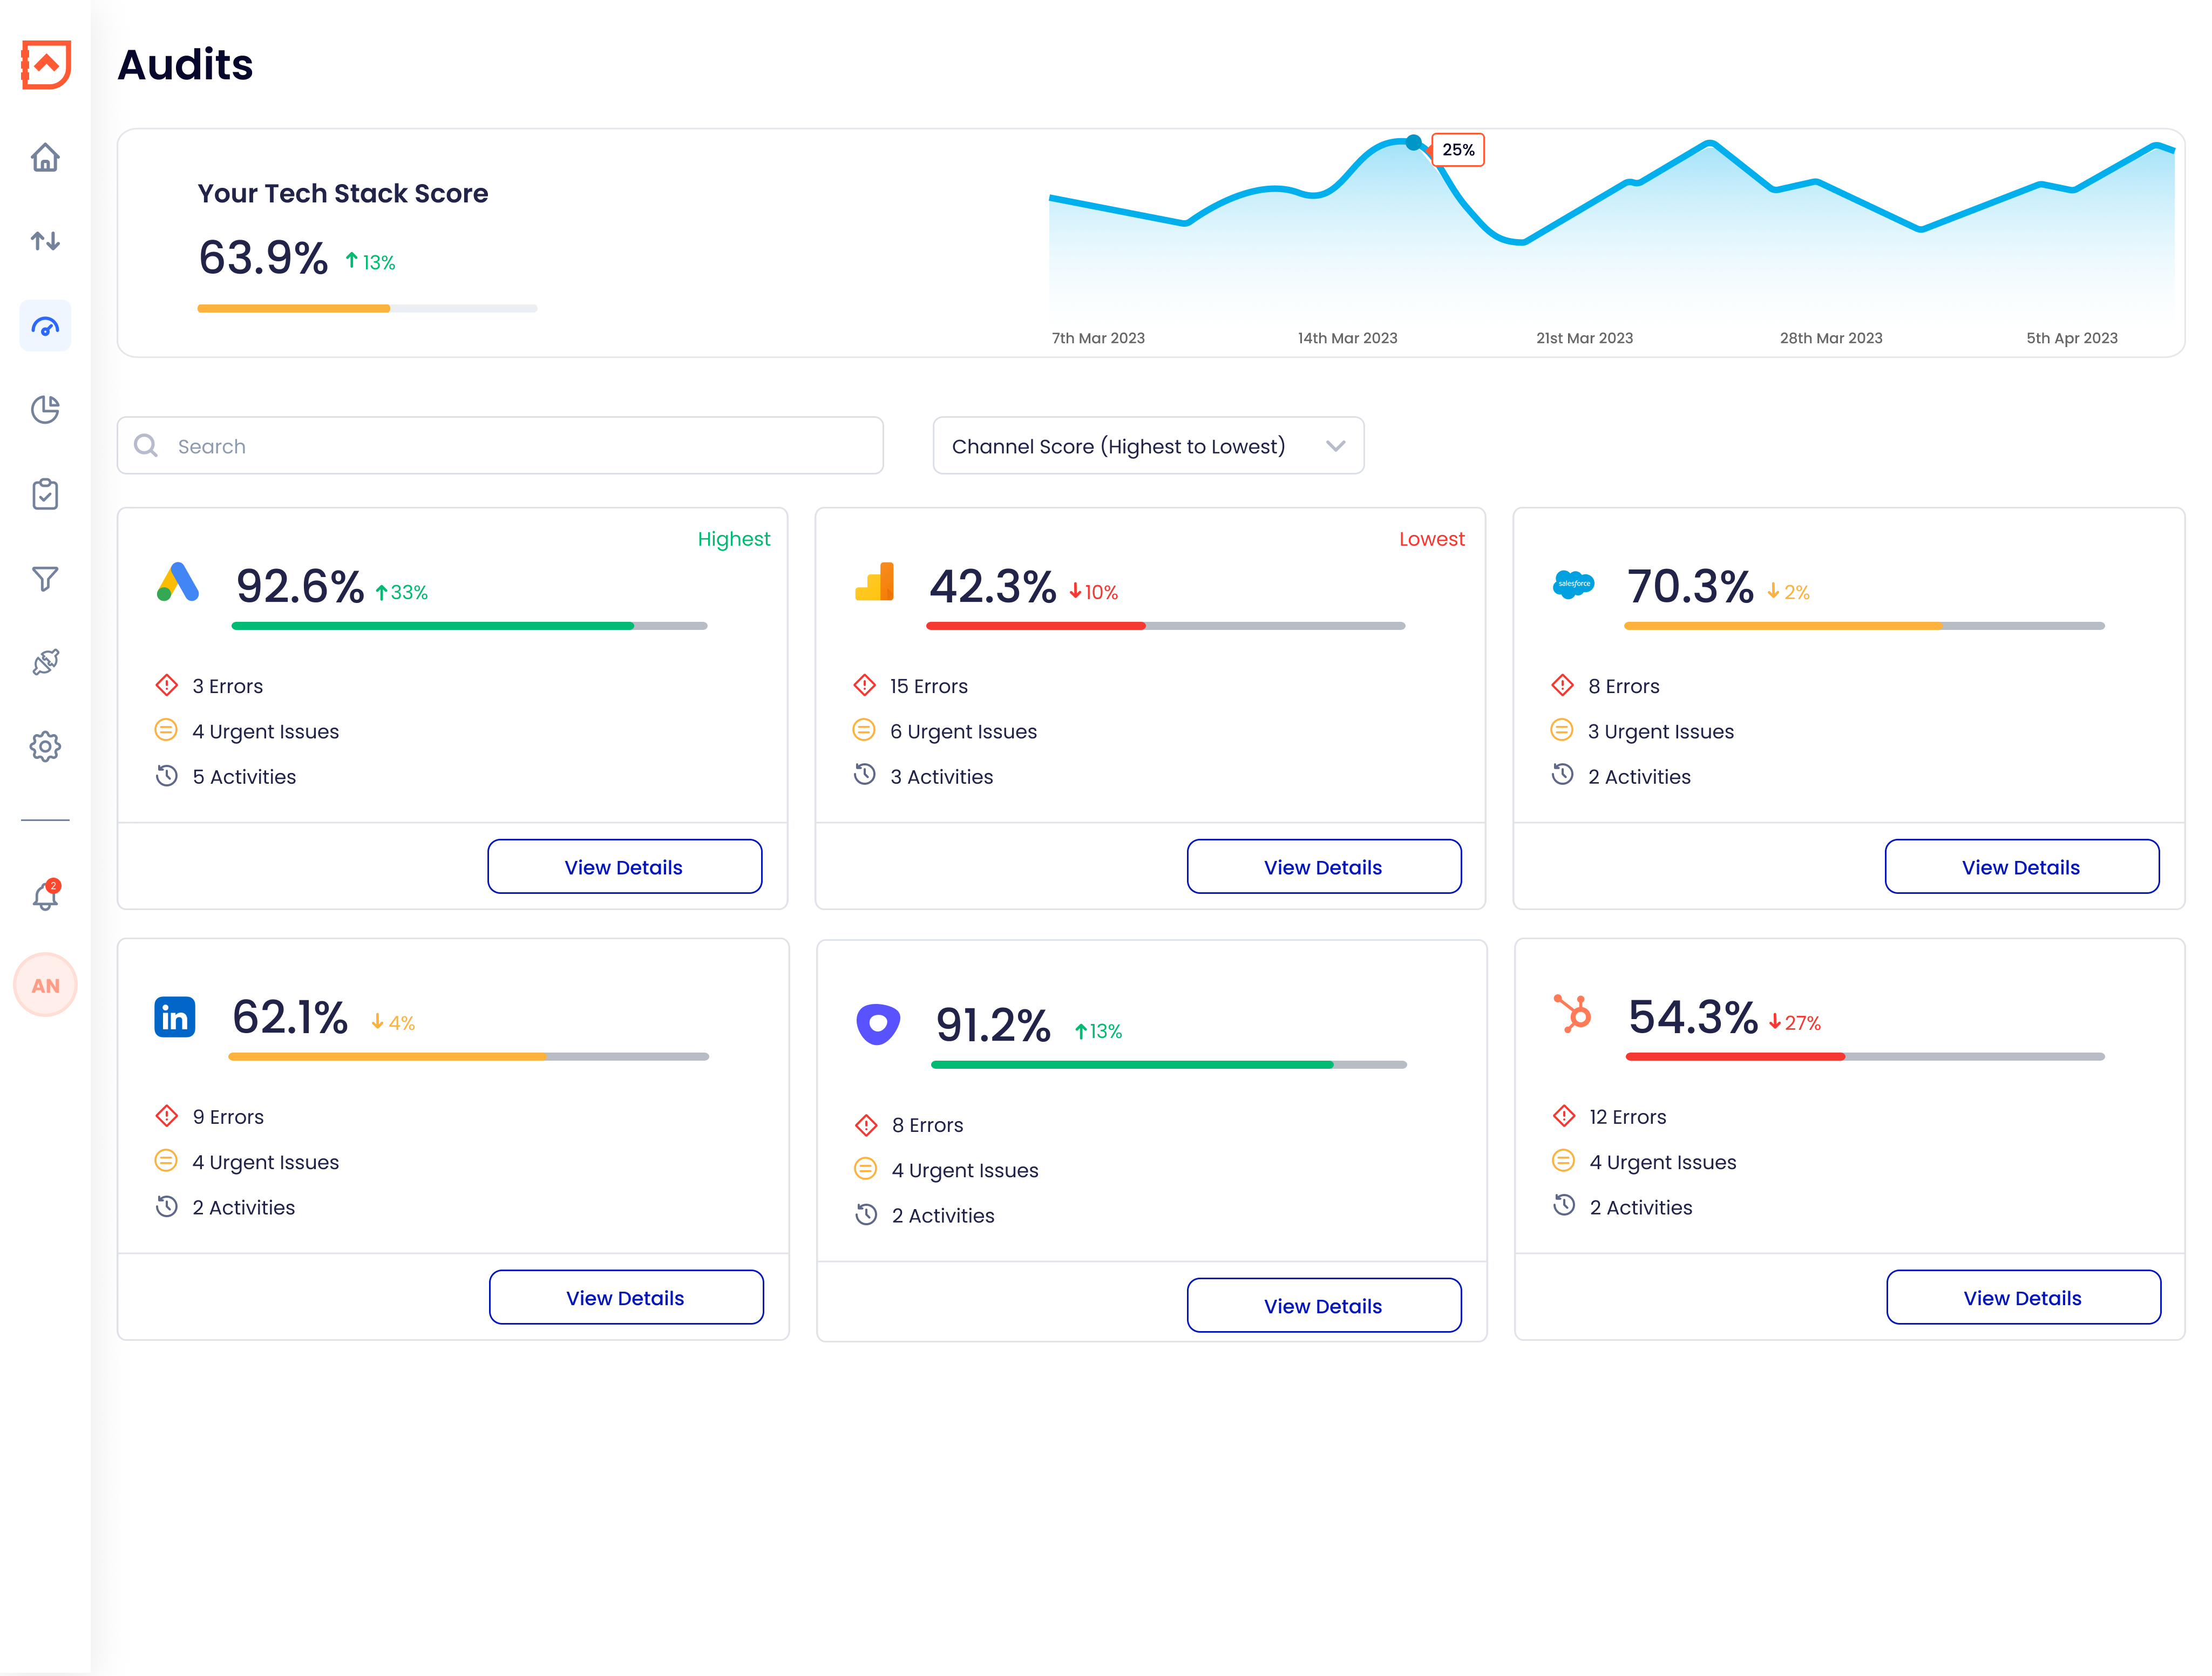 Audits—a powerful feature enabling you to perform custom analysis of your tech stack's performance. With Audits, you can swiftly identify and rectify errors, transforming obstacles into actionable tasks.